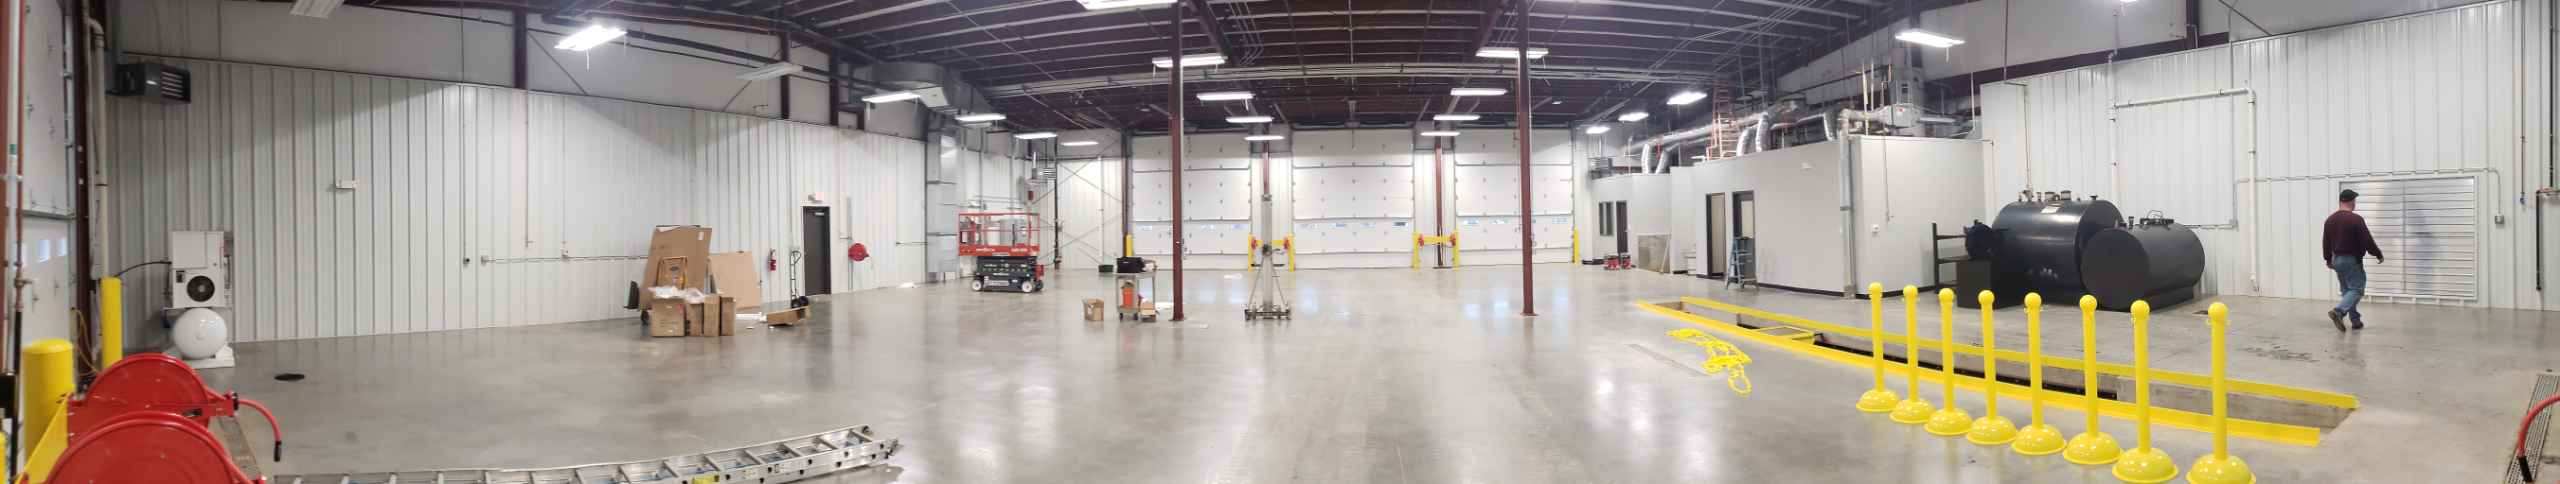 Barr-Nunn Charlotte, NC truck terminal building showing service bays and employee